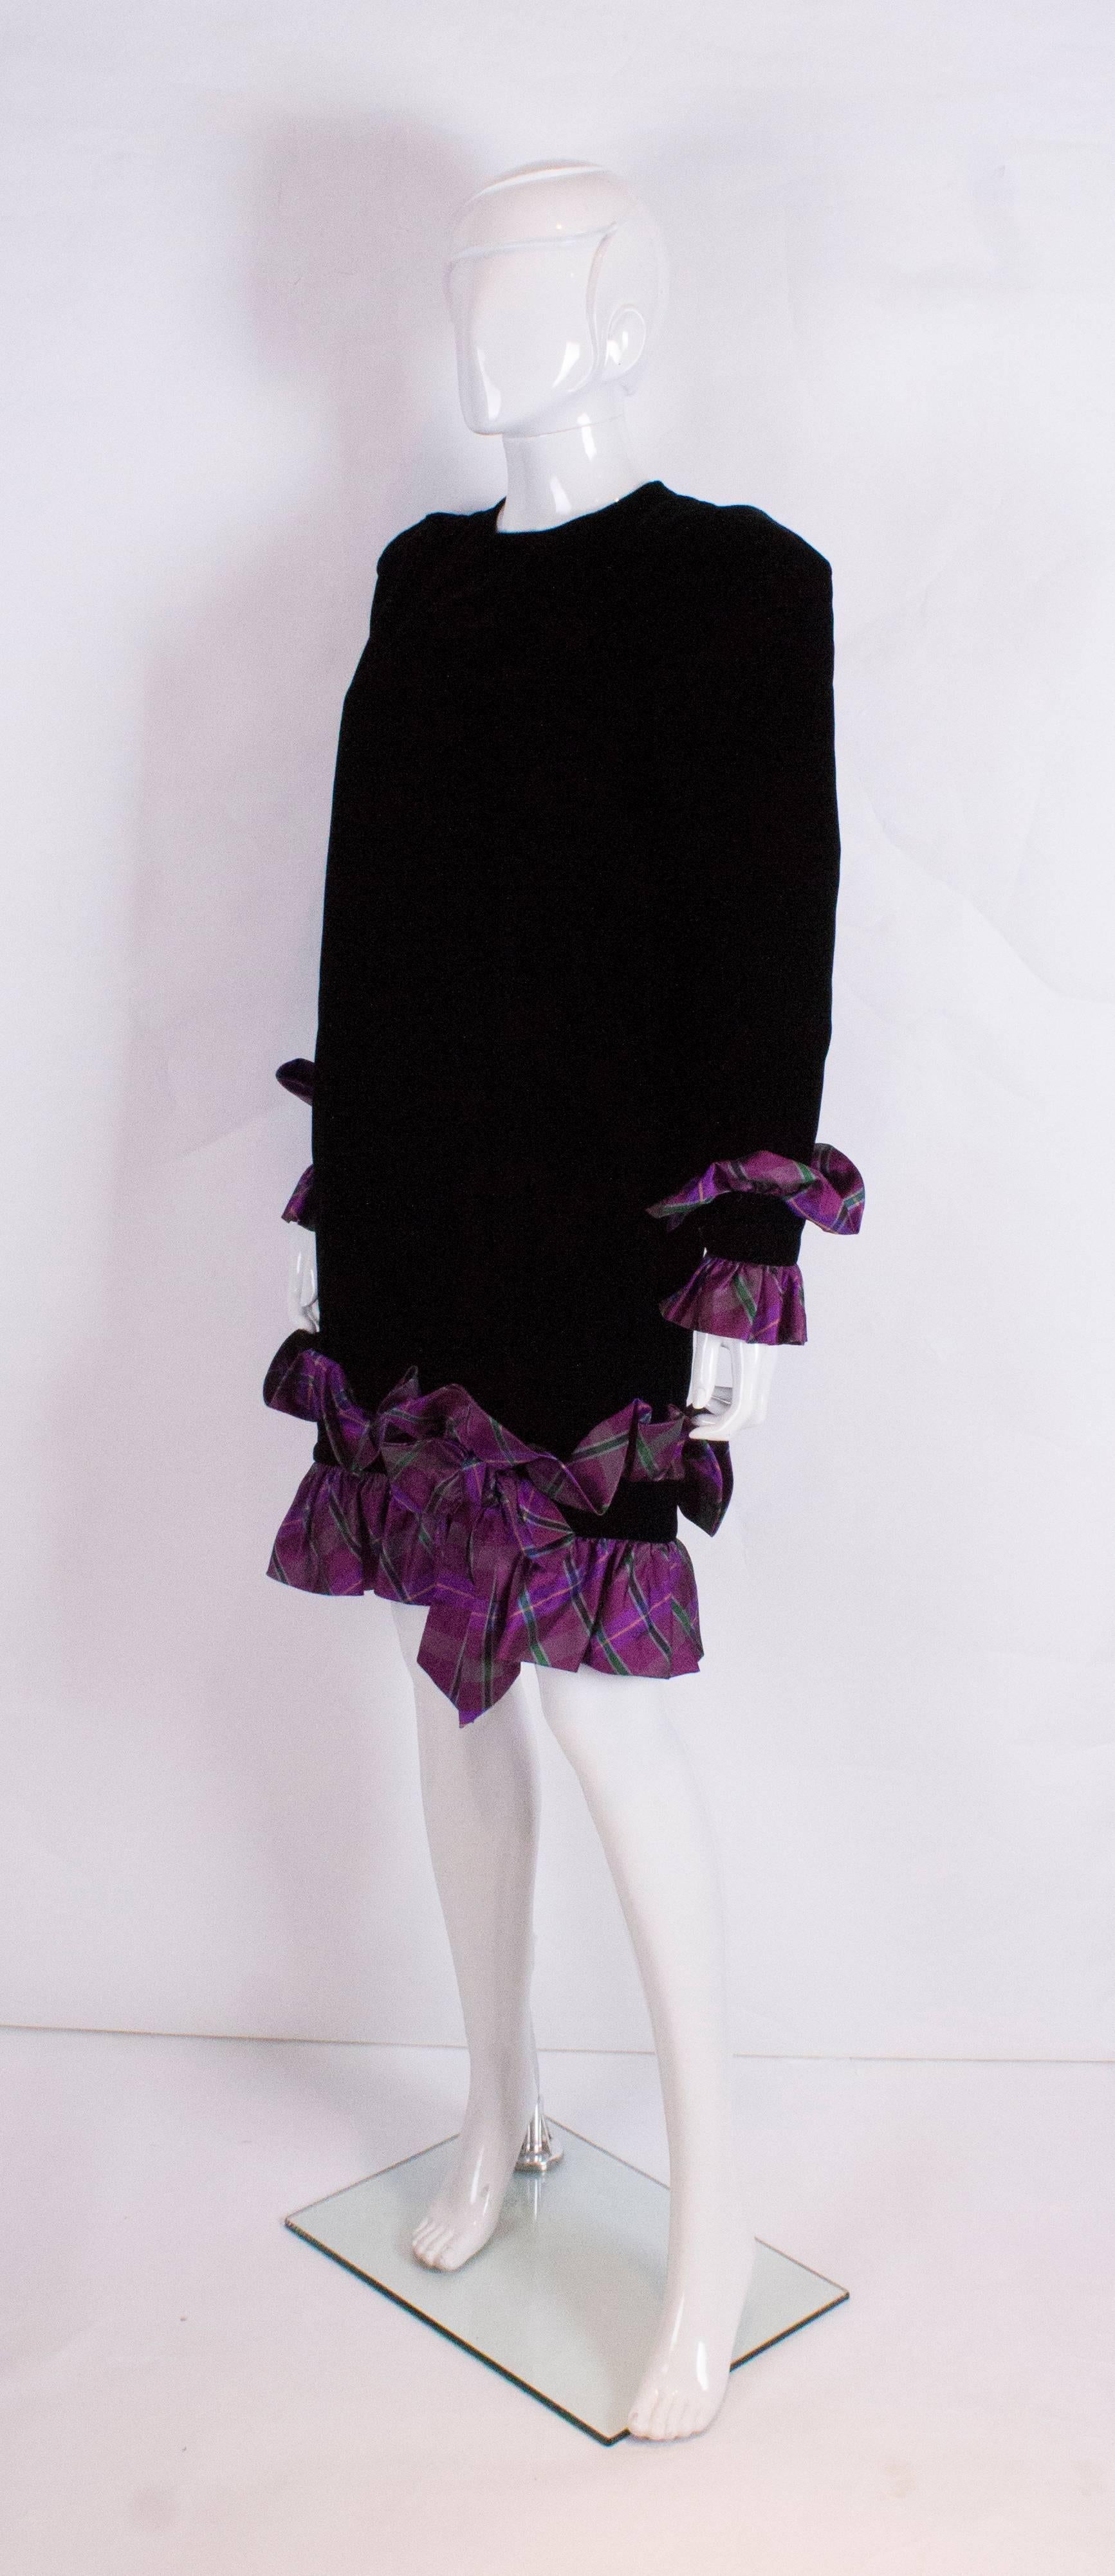 A chic dress by Italian designer Juditte. The body of the dress is black velvet and the lilac tartan frills are on the hem and cuffs. The cuffs have two buttons and there is  a button opening at the back of the dress.